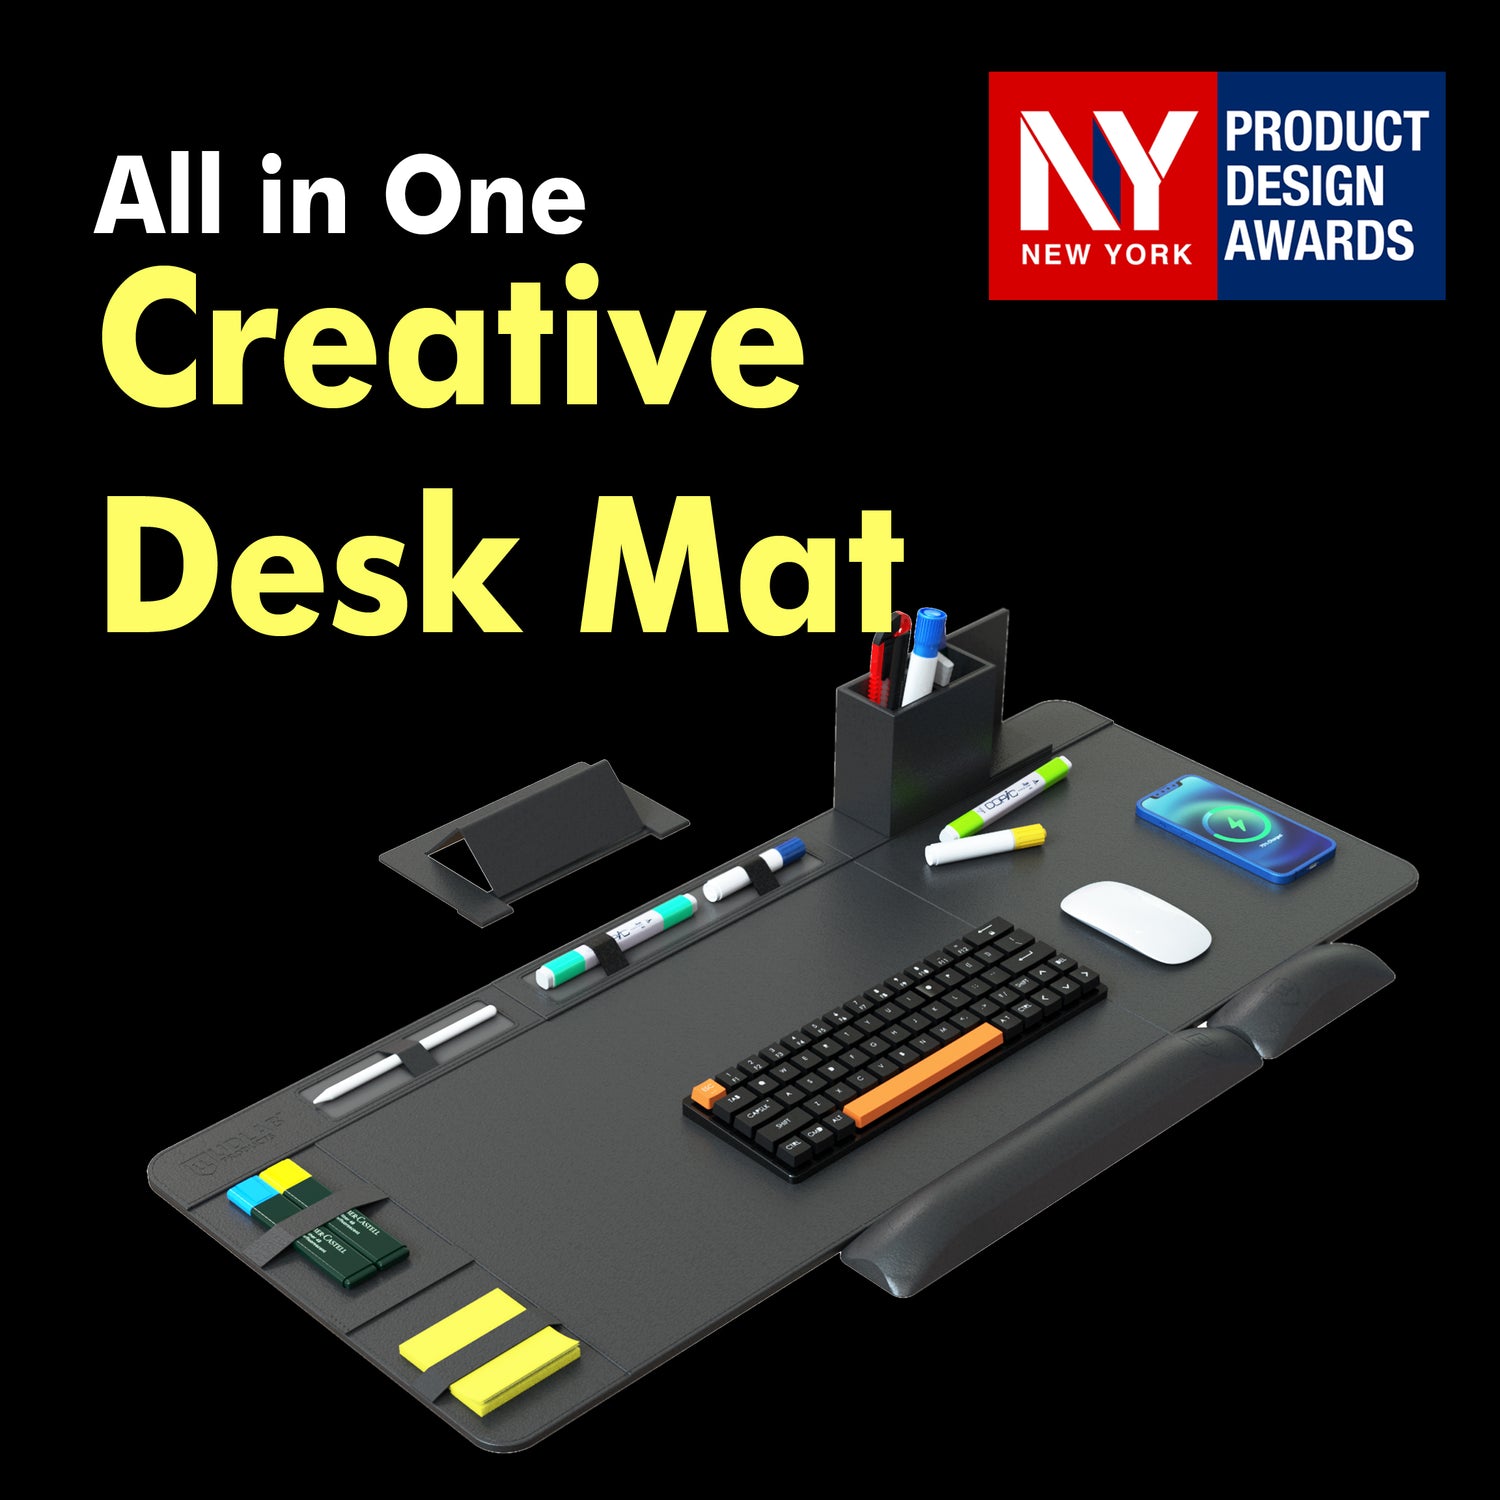 Best Leather Desk Blotter & Pad | Office Computer Desk Mat with Wireless Charging (Black & White)